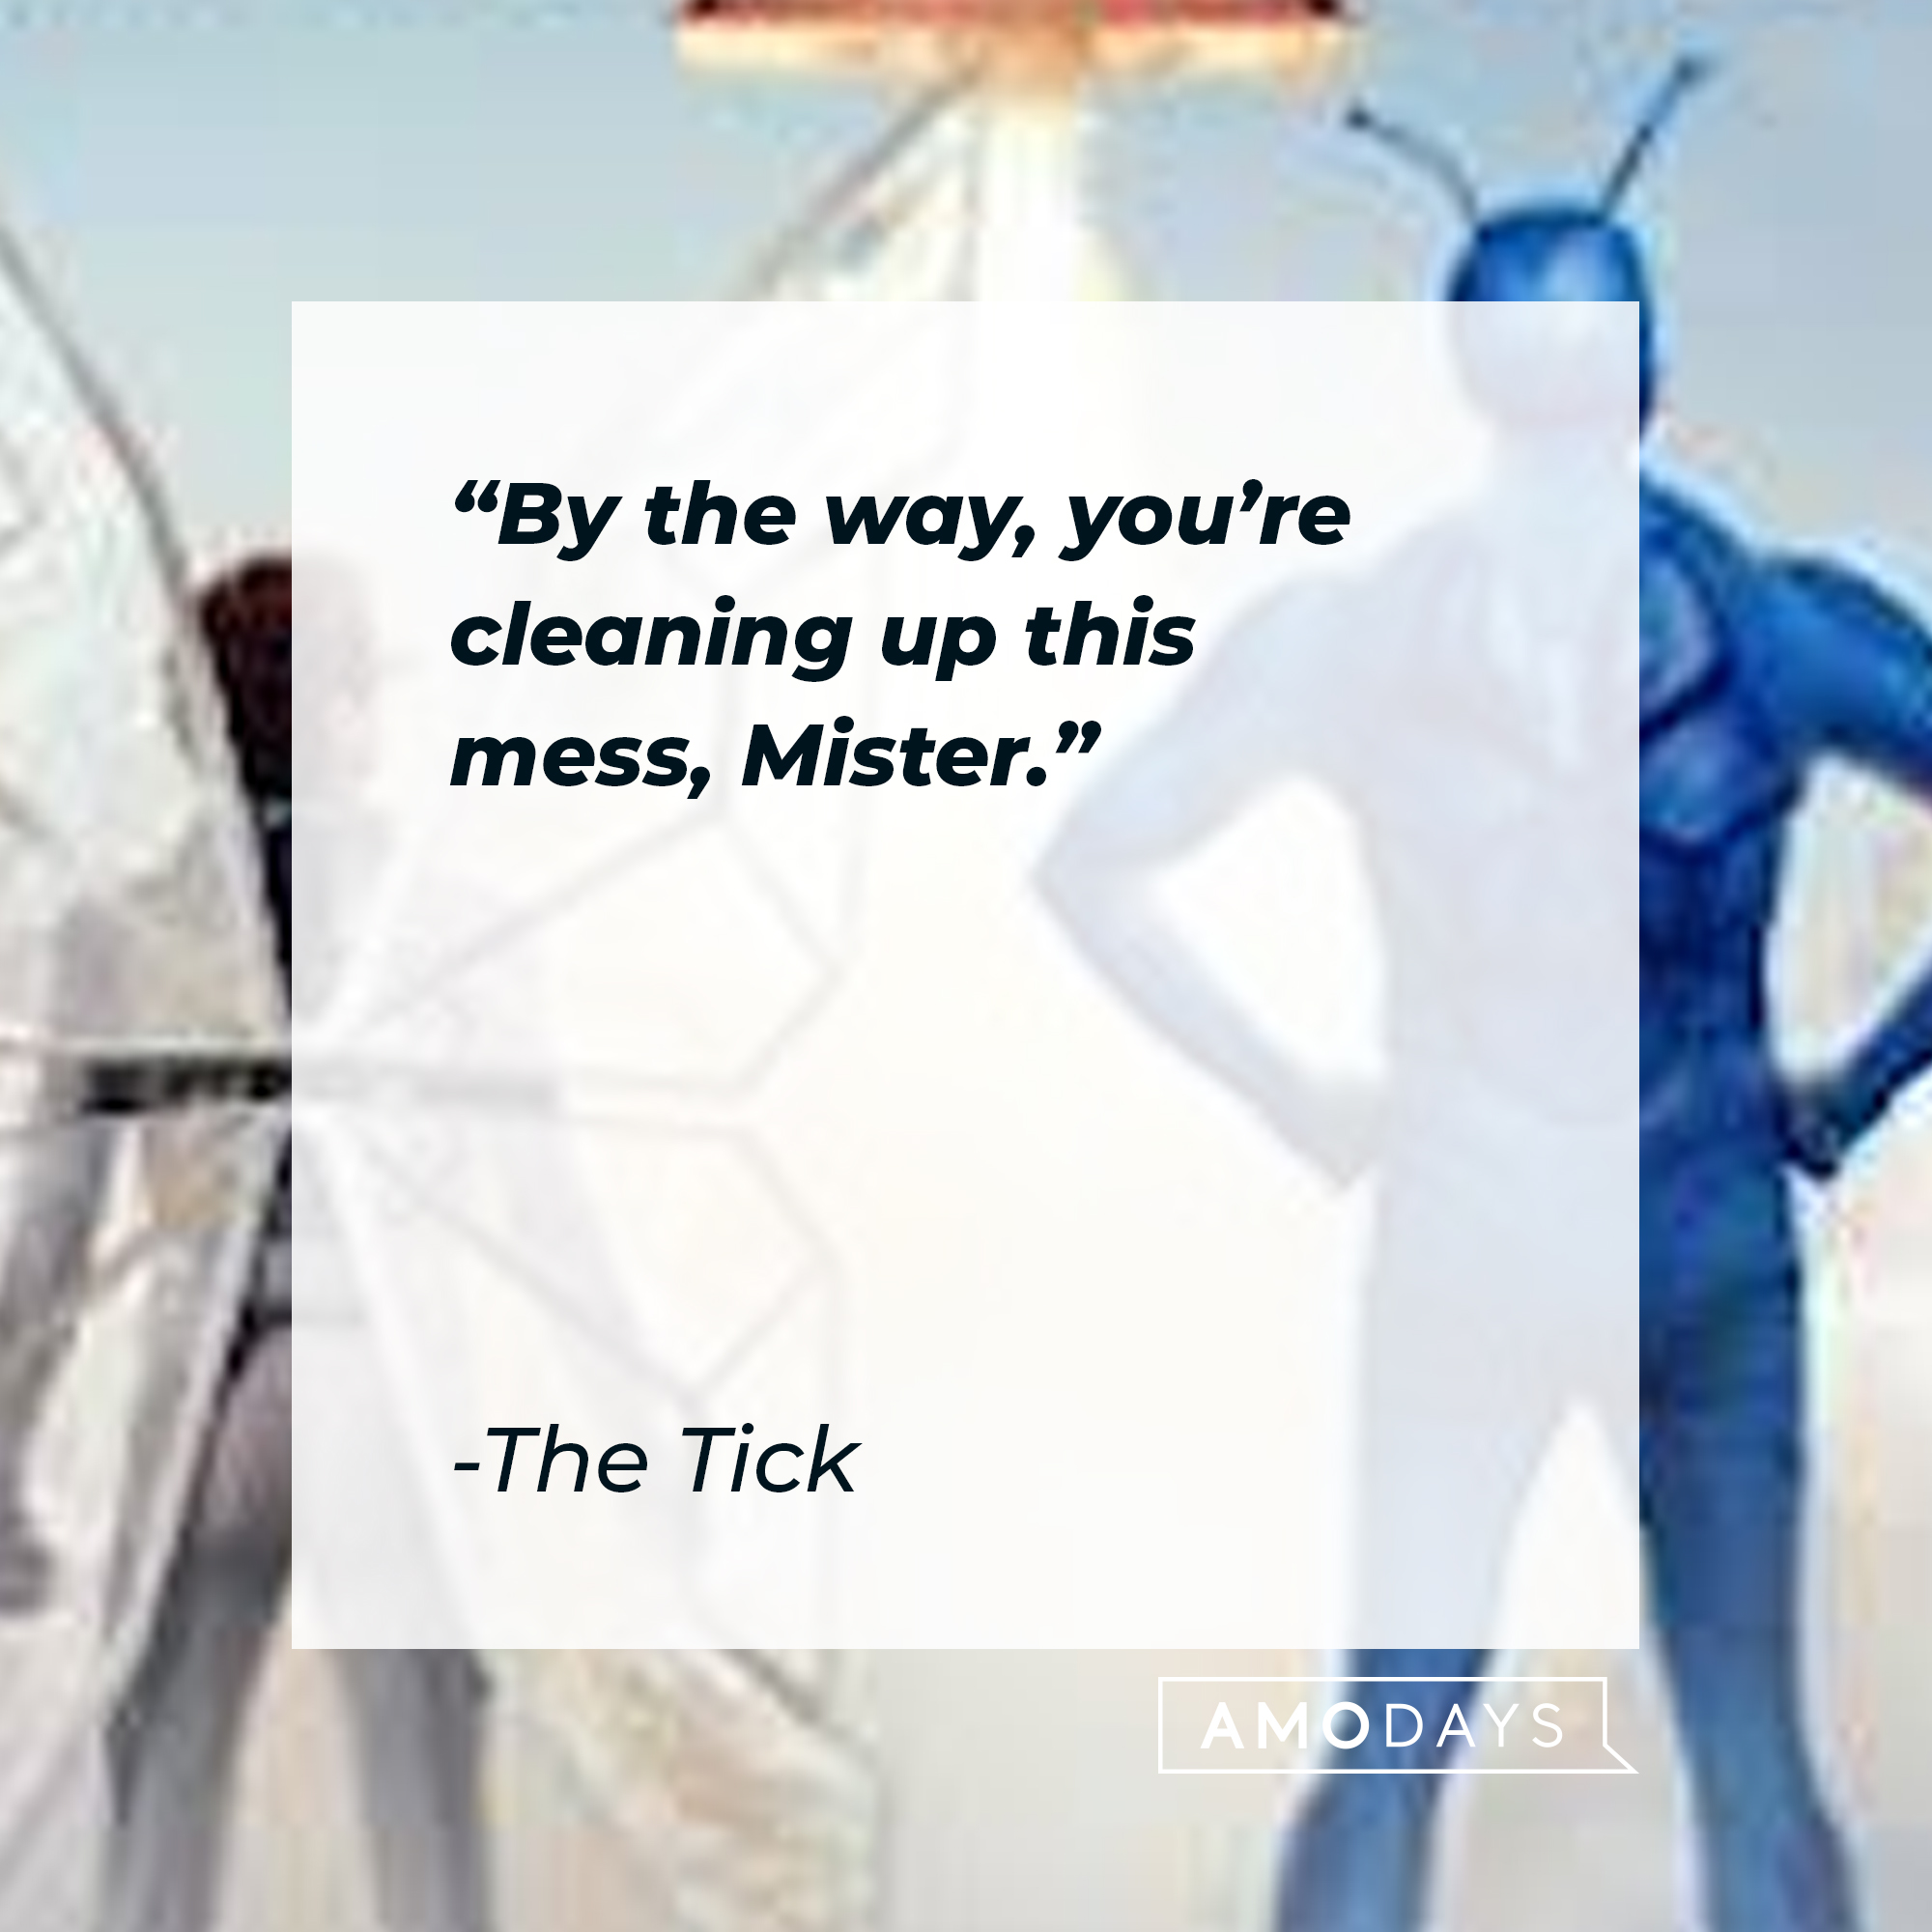 The Tick's quote: "By the way, you’re cleaning up this mess, Mister." | Source: Facebook.com/TheTick